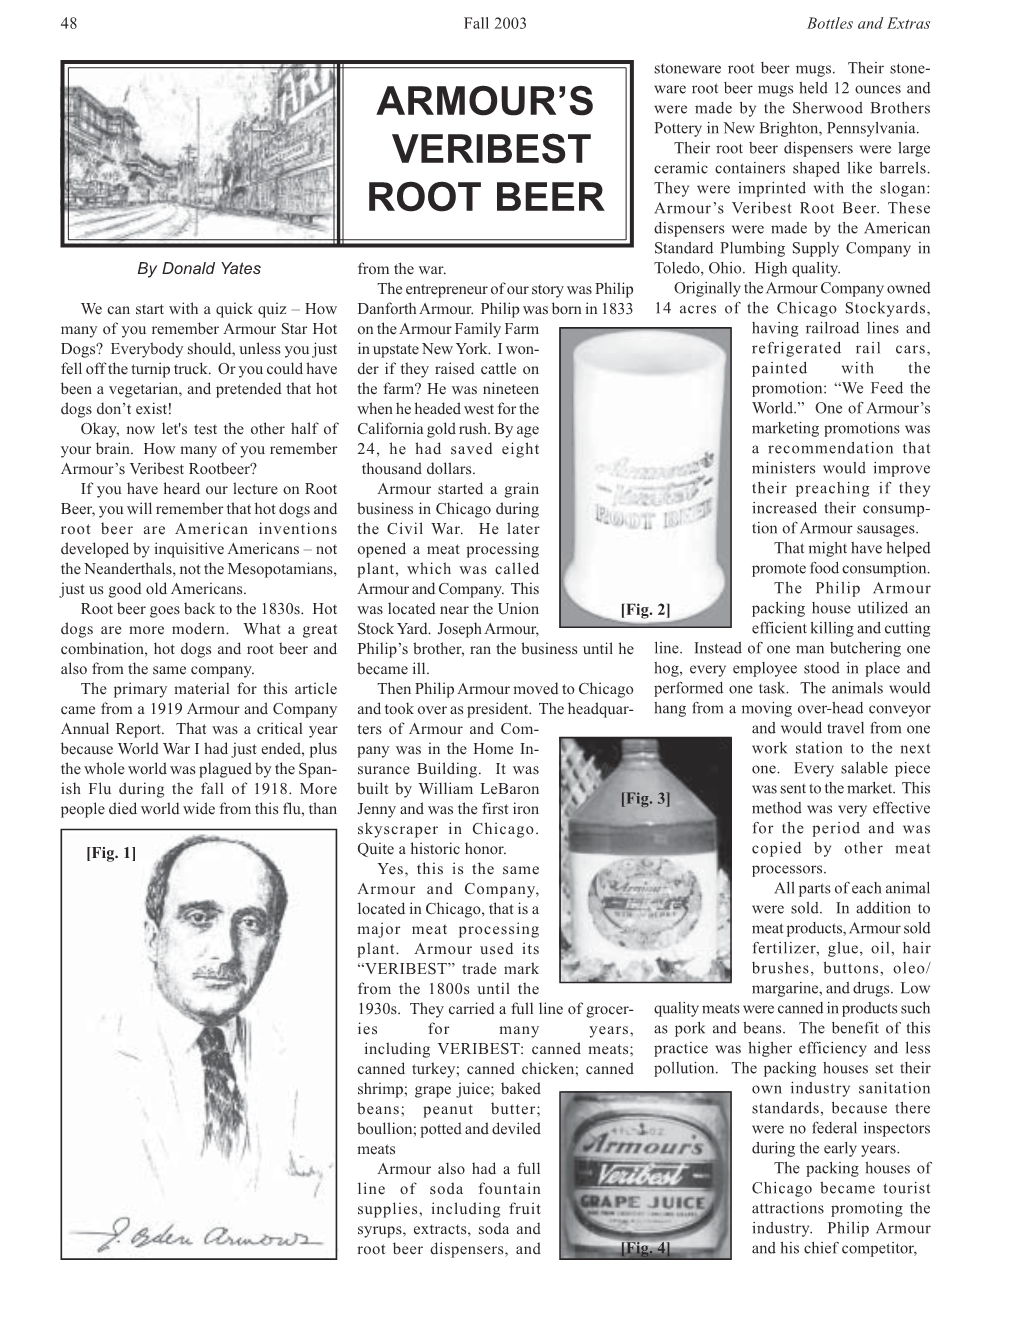 Armour's Root Beer